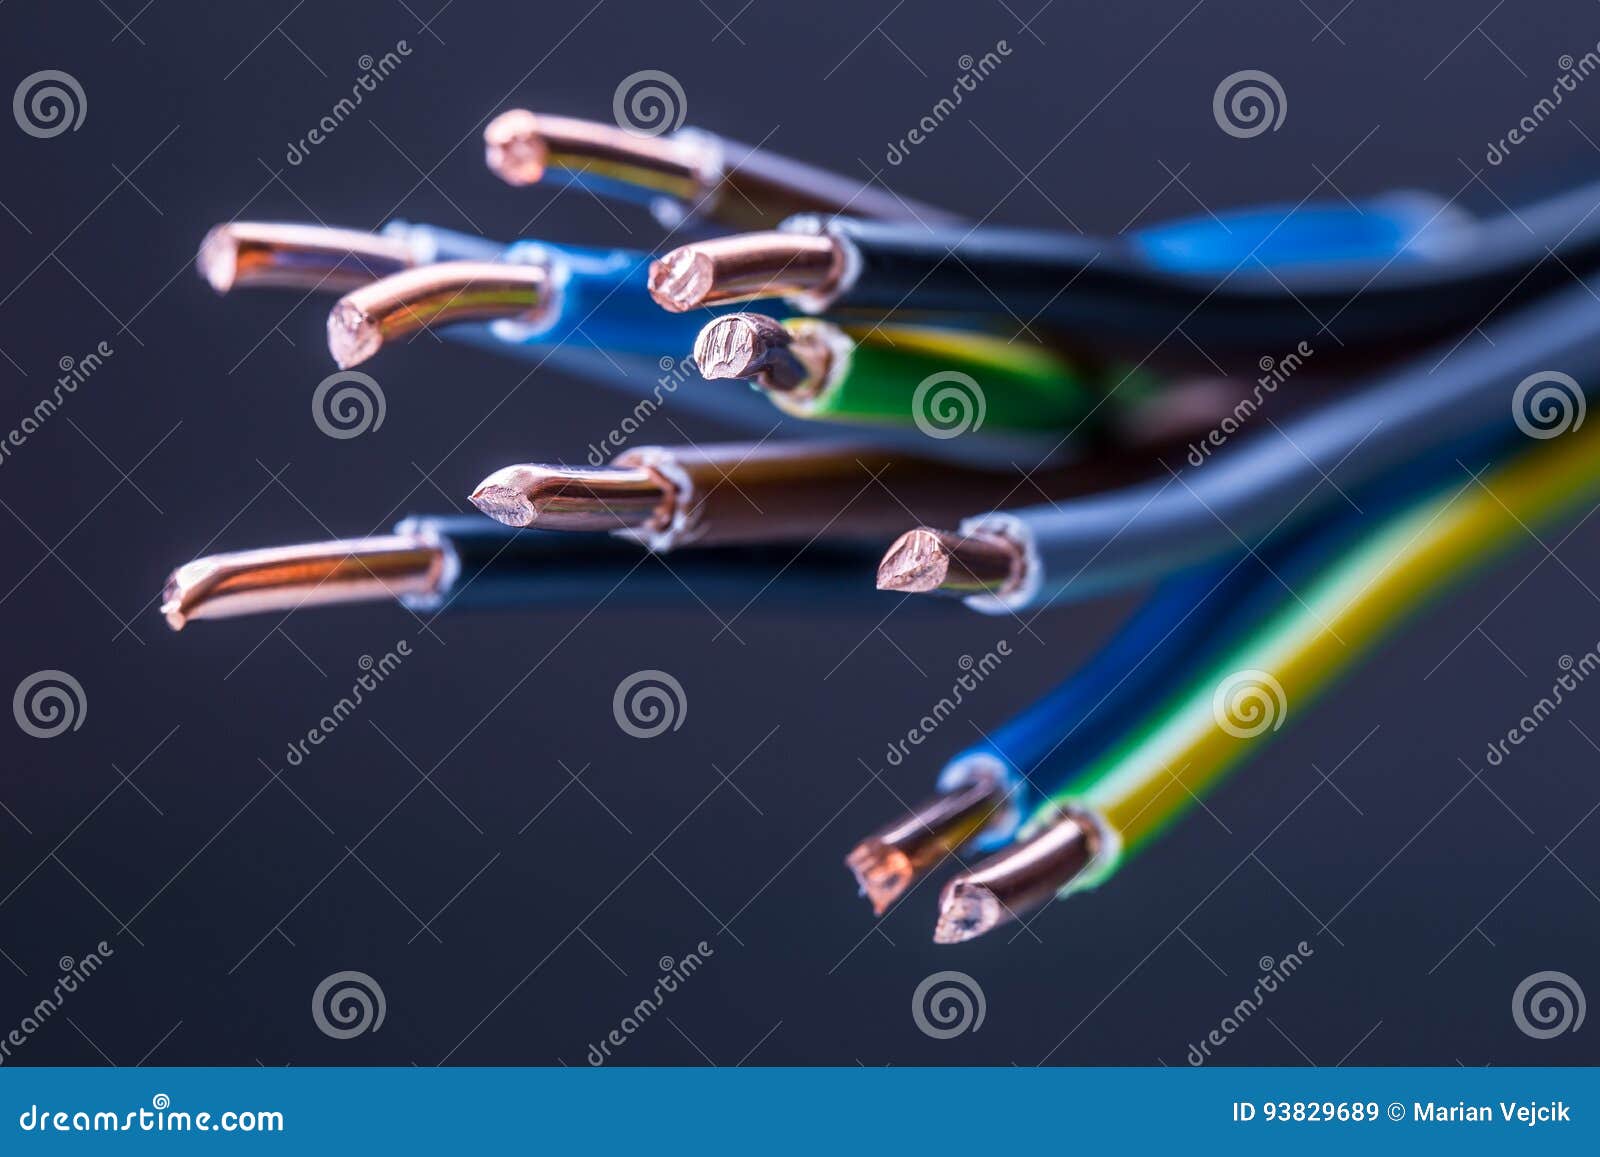 group of colored electrical cables - studio shot